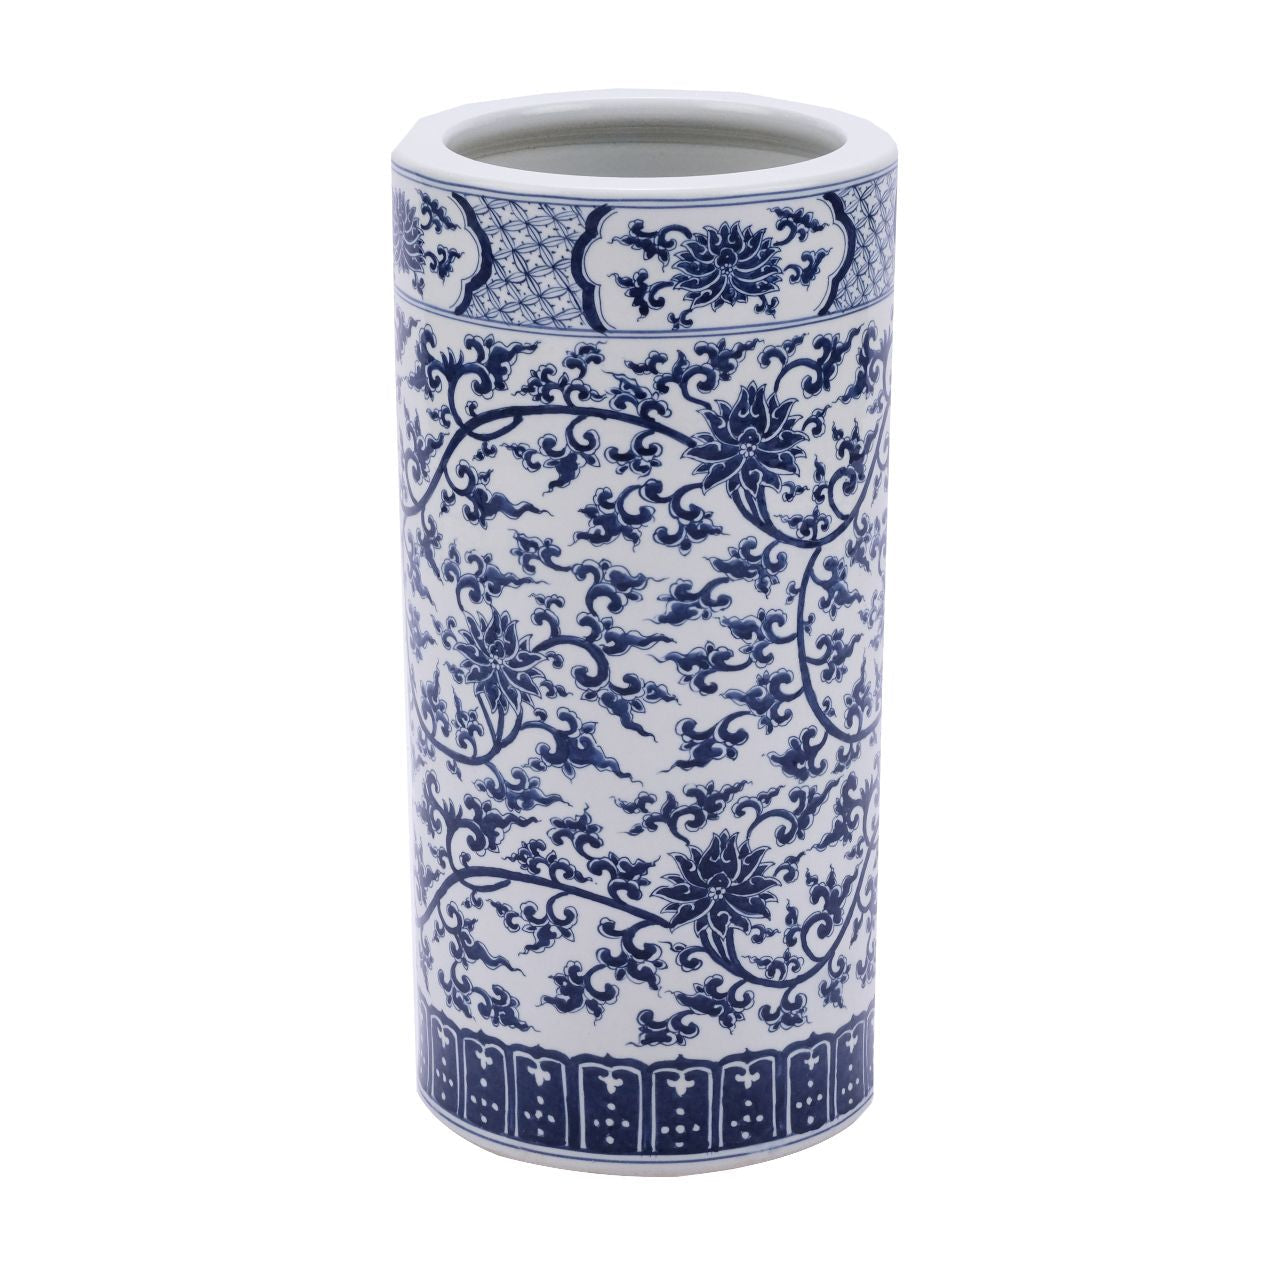 Legend of Asia Giftware Legend of Asia Blue & White Twisted Lotus Umbrella Stand Vase